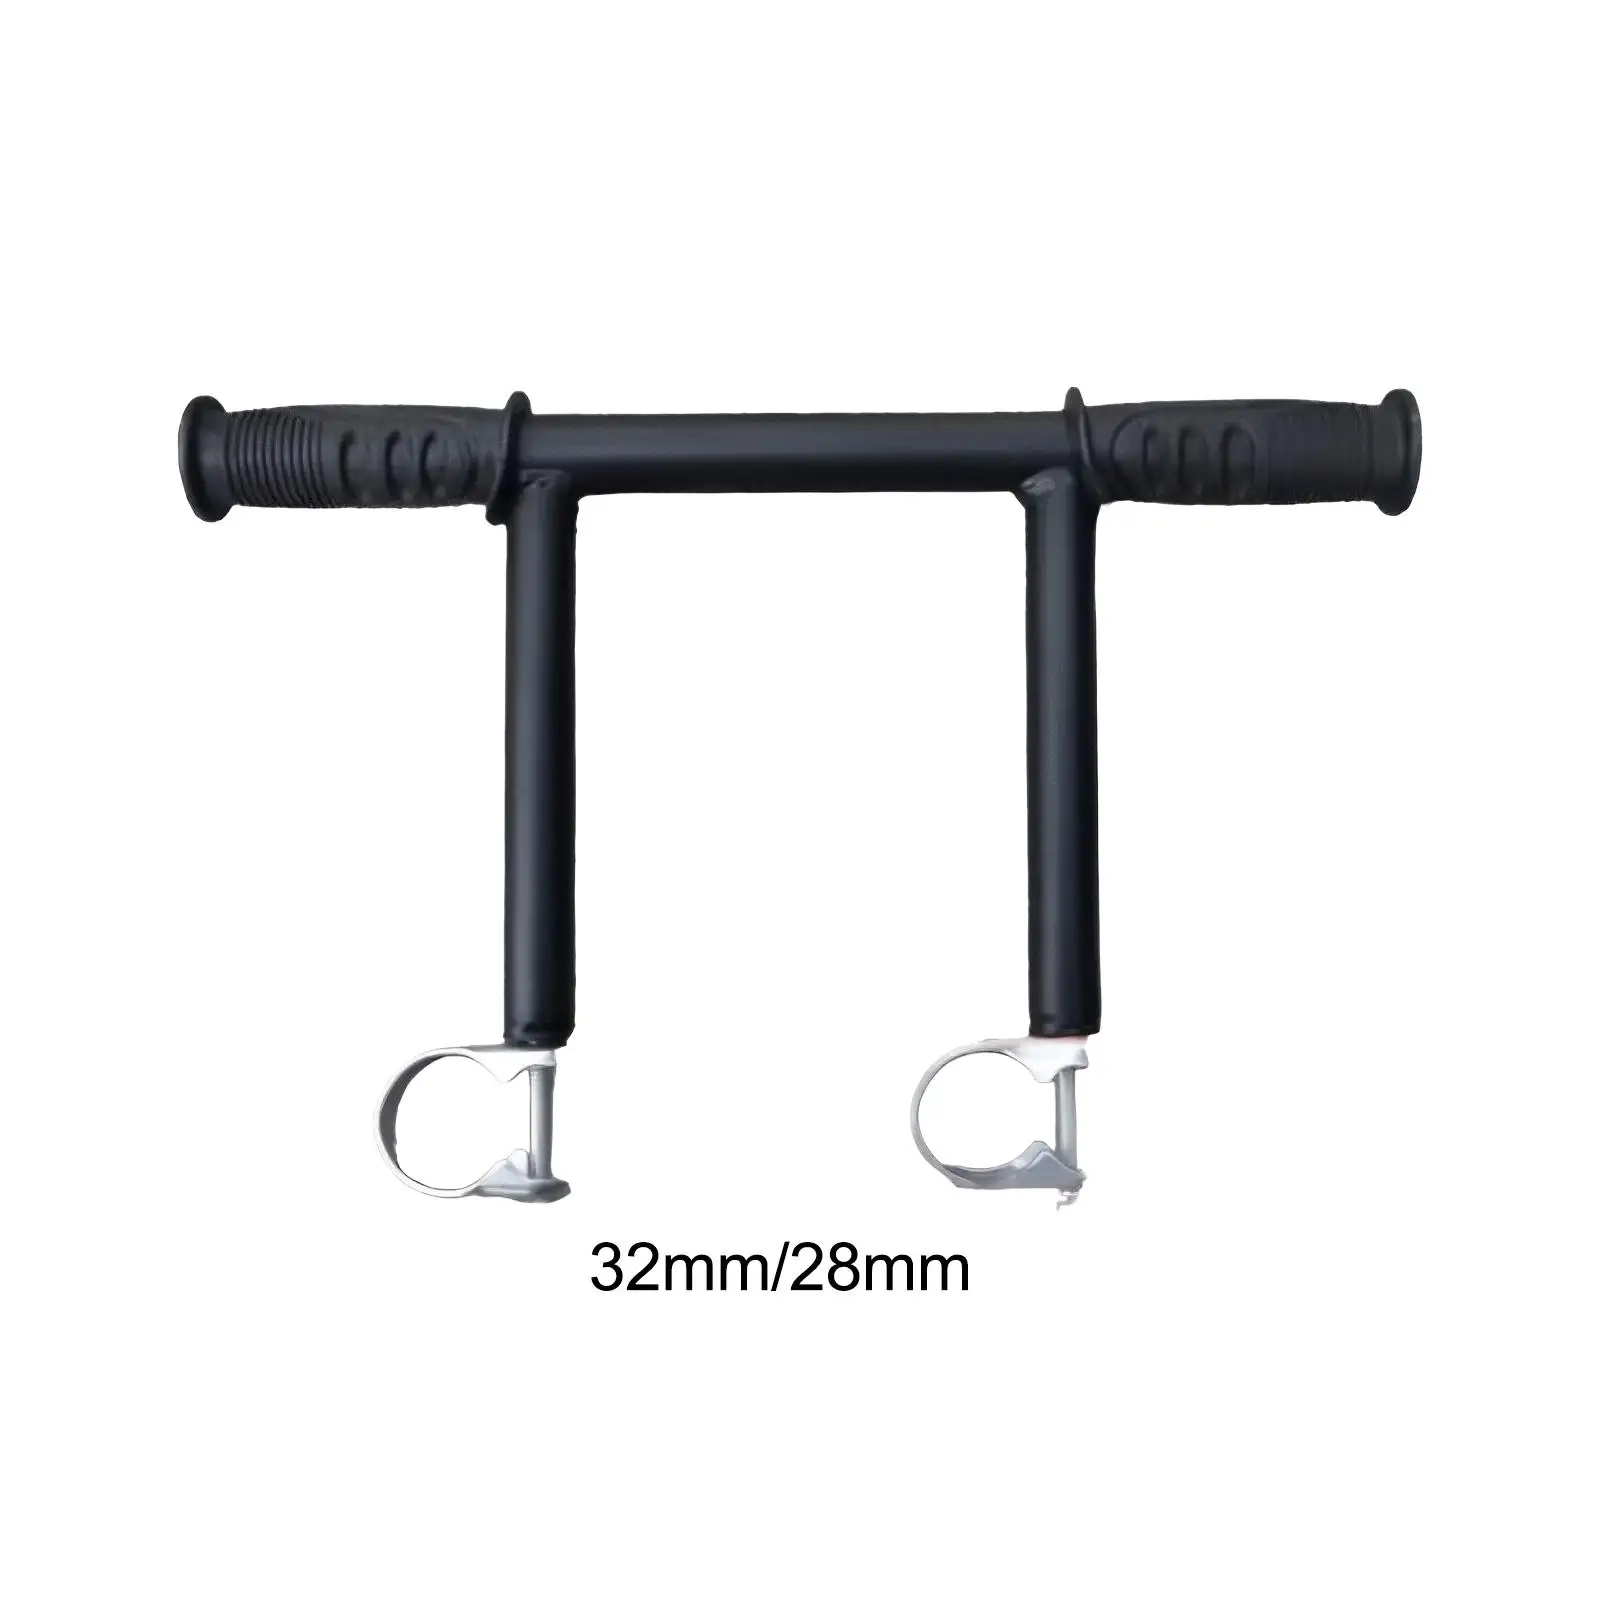 

Metal Easy to Install Sturdy Detachable Durable Handlebars Extender Extension for Pushchair Baby Carriages Pram Trolley Accs